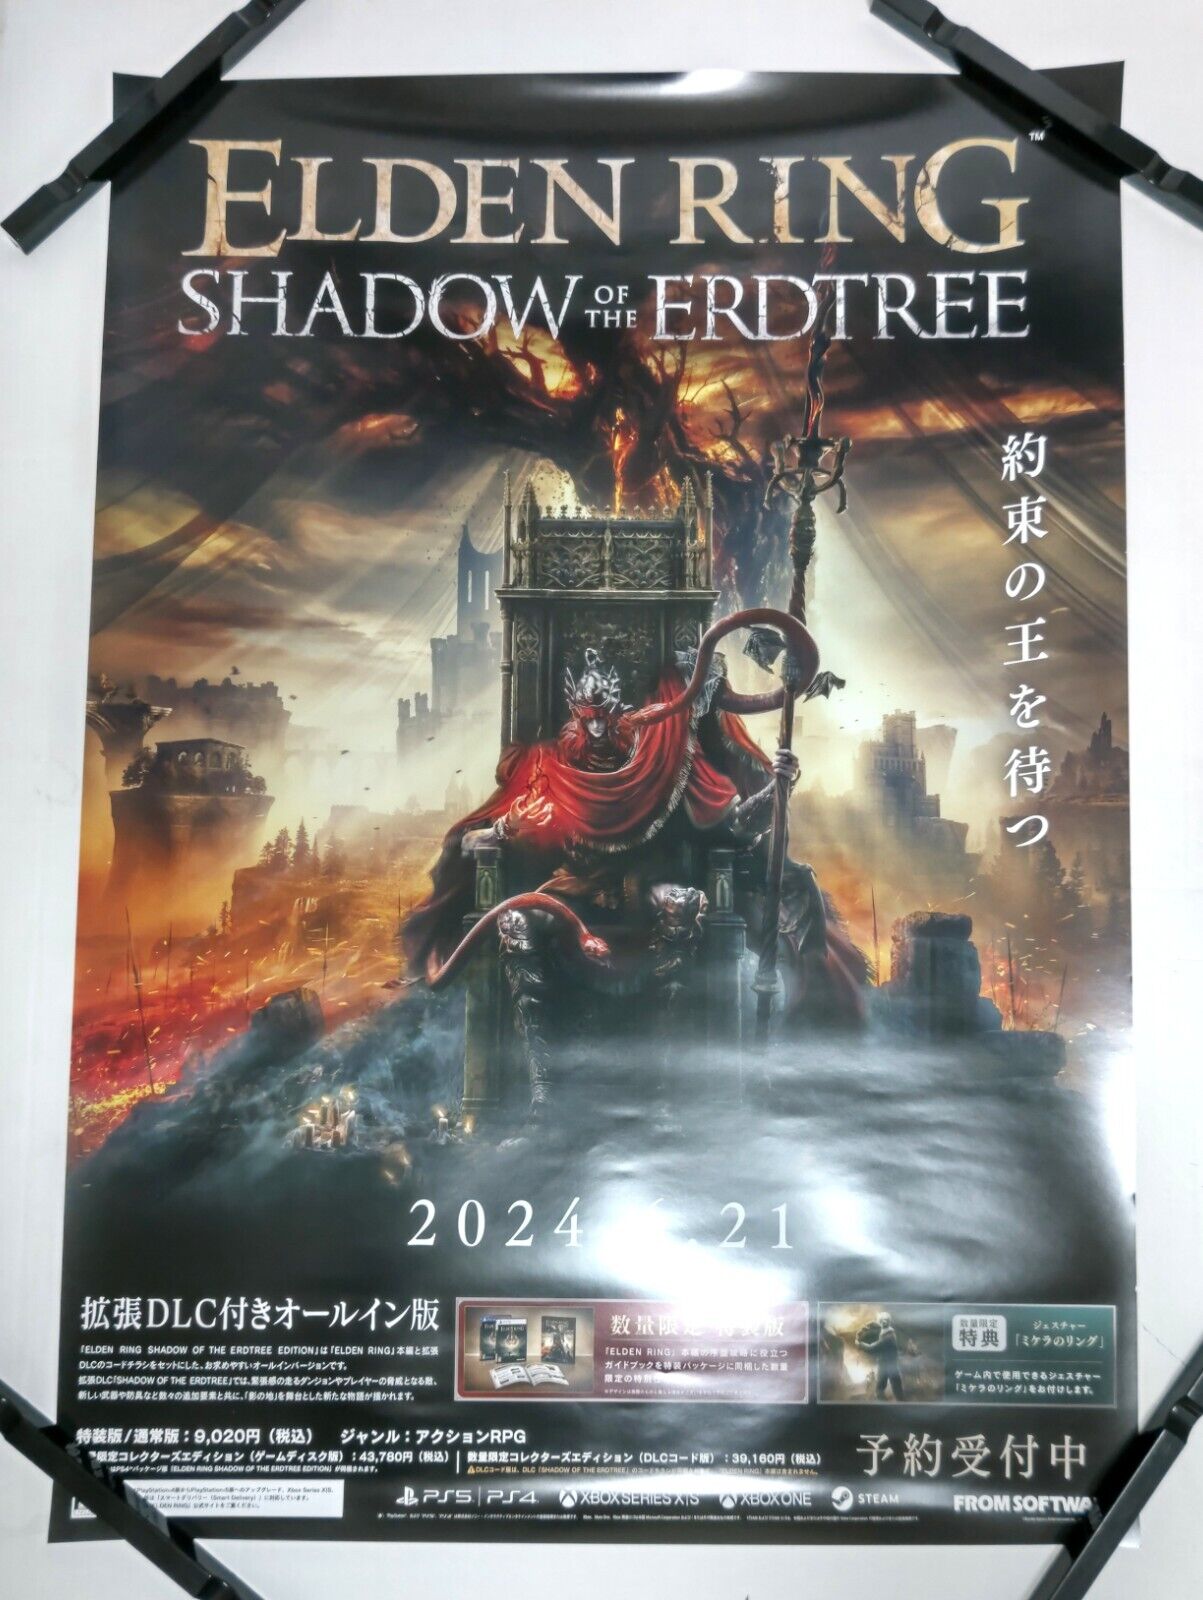 Game Official Promo Poster ELDEN RING SHADOW OF THE ERDTREE SizeB2 PS5